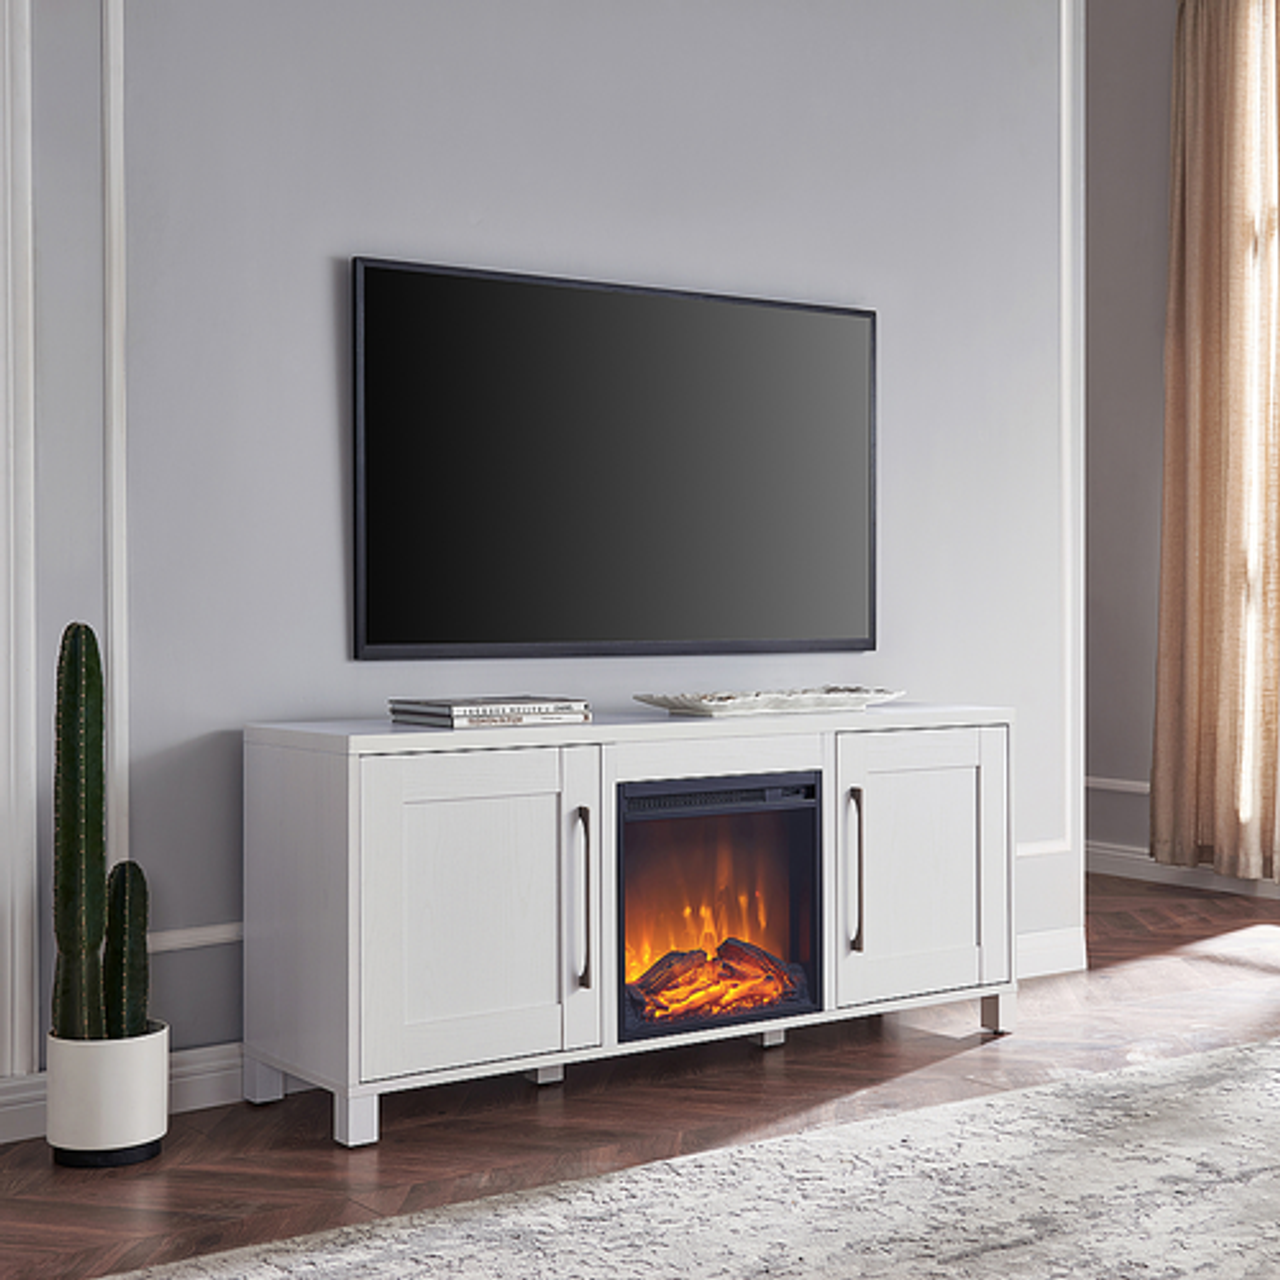 Camden&Wells - Chabot Log Fireplace TV Stand for TVs up to 65" - White